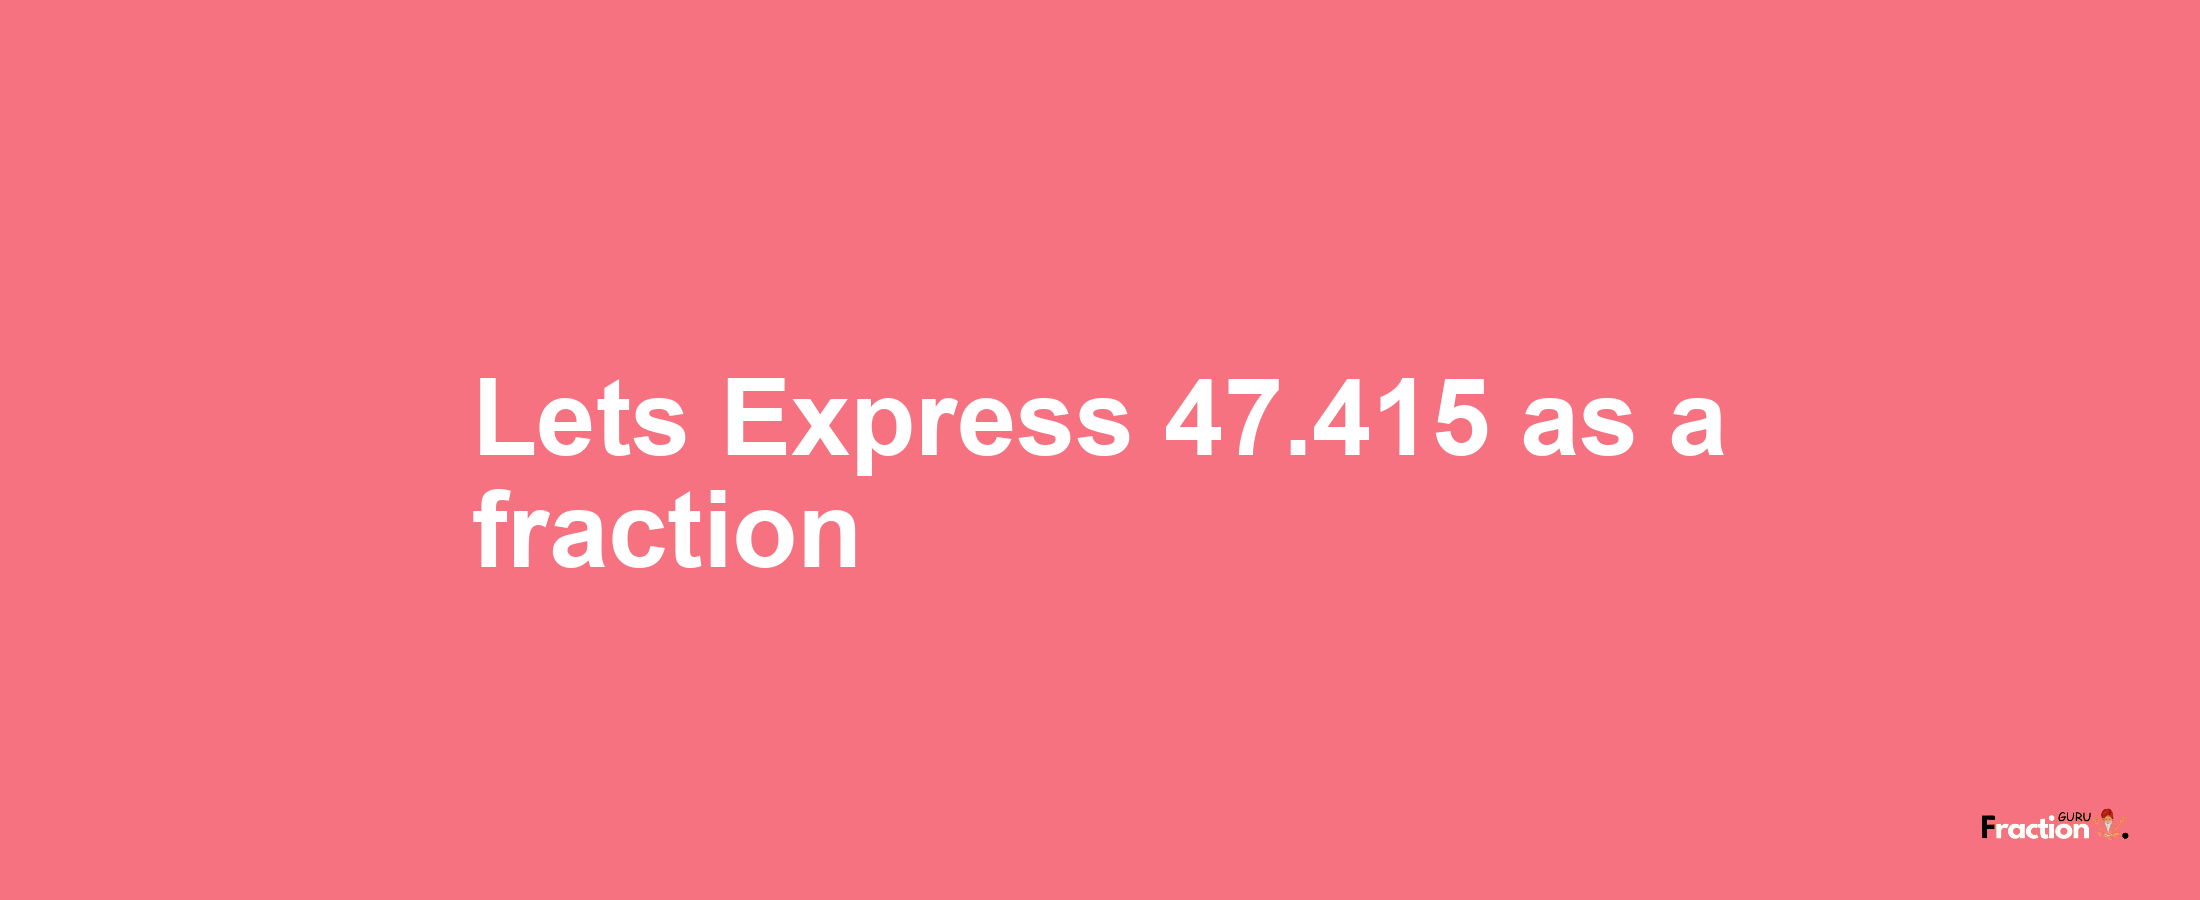 Lets Express 47.415 as afraction